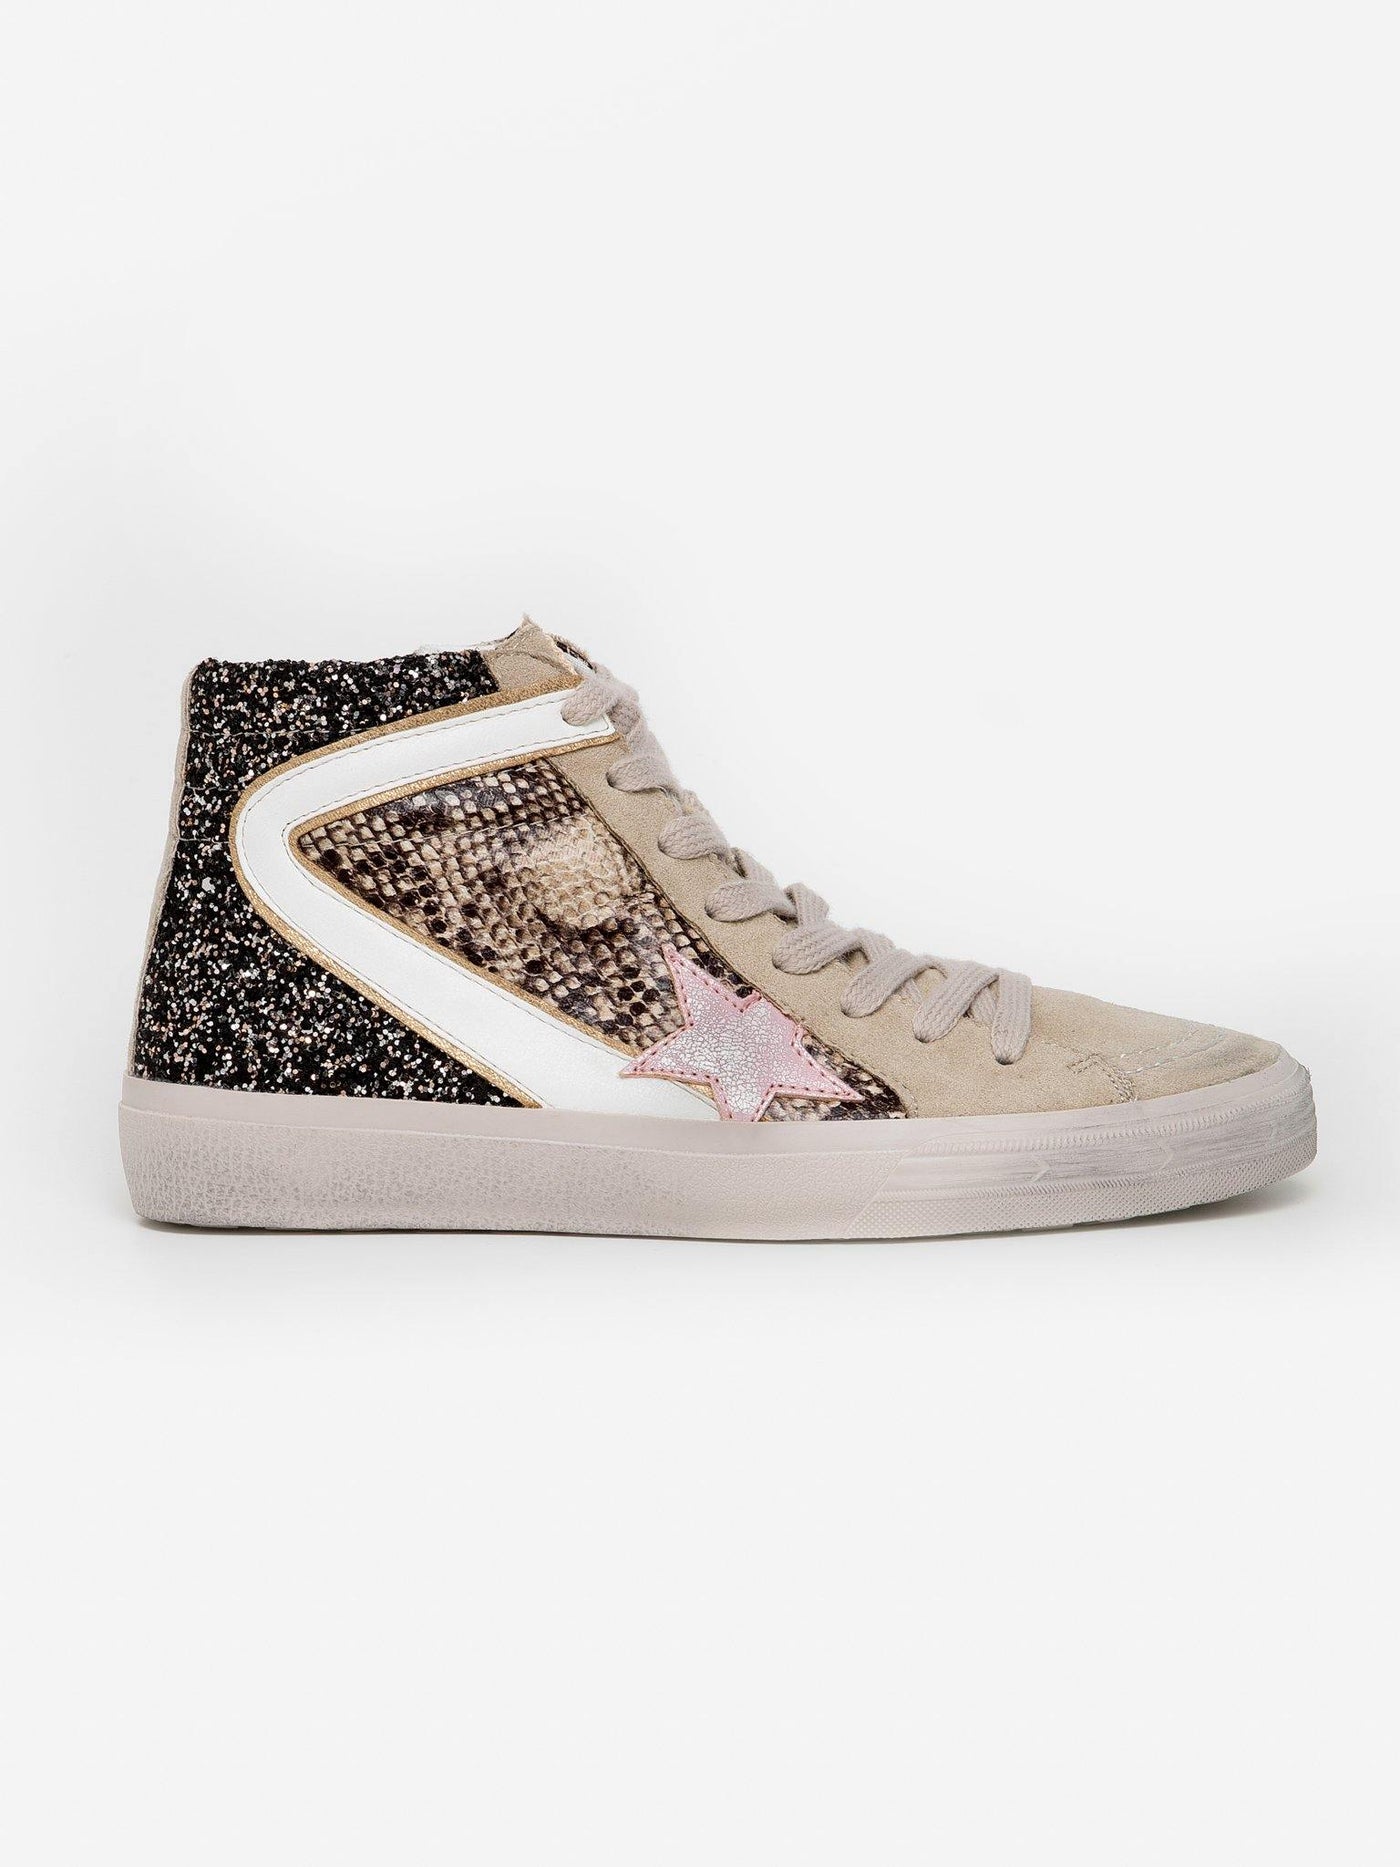 Bamba STAR MID Serpiente - MMShoes